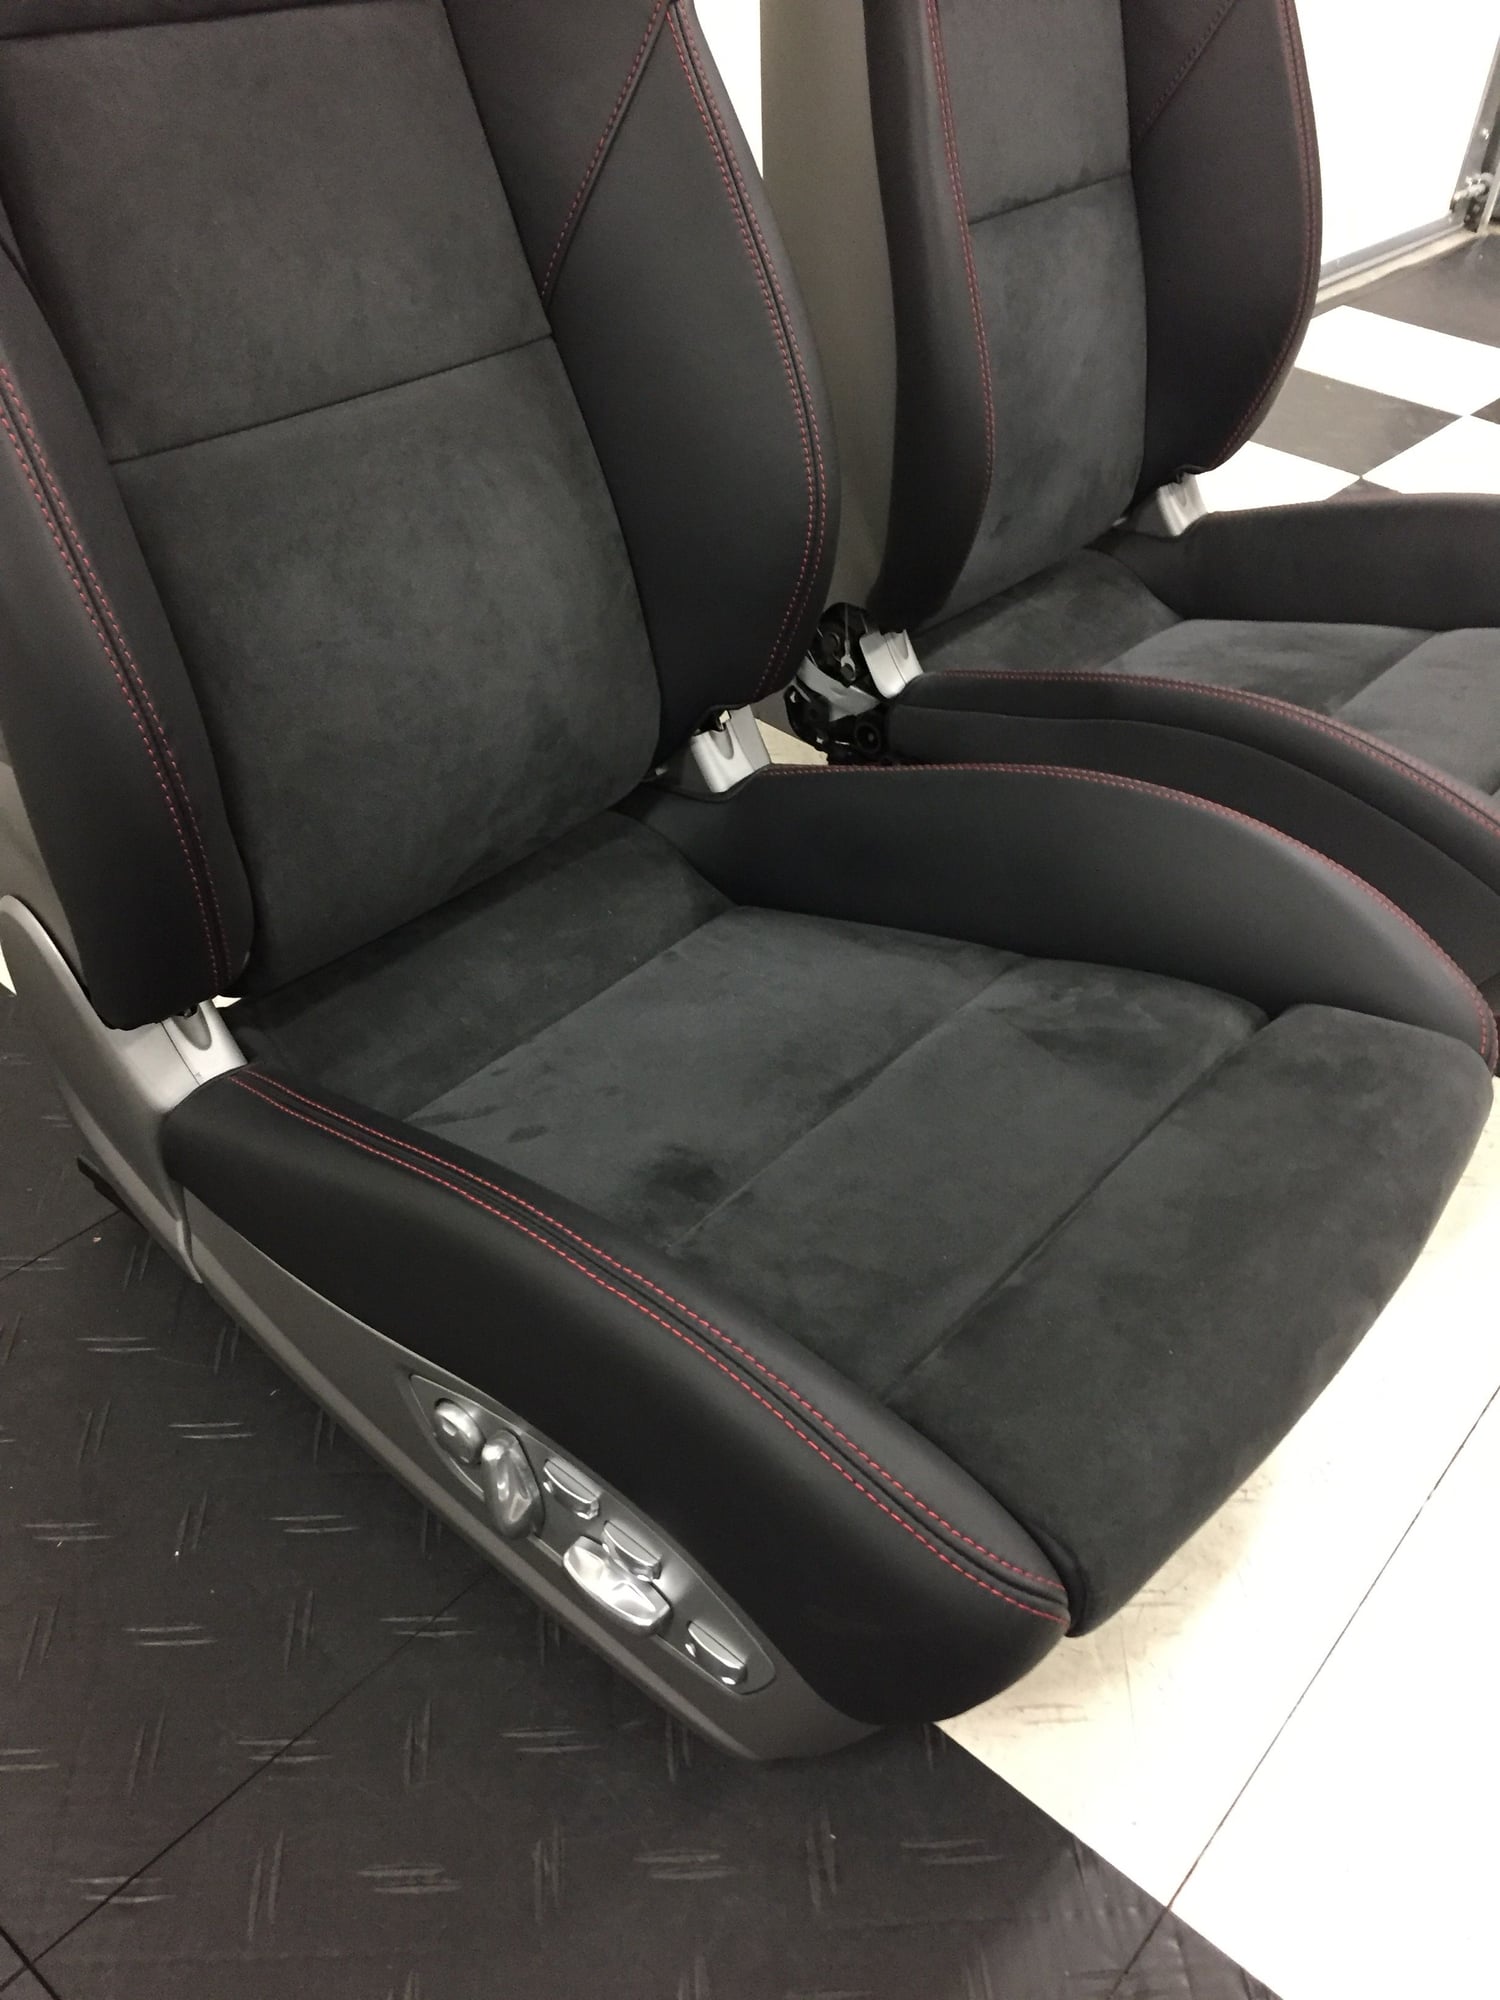 Interior/Upholstery - FS: 991 GT3 18 - Way Sofa Seats with RED stitching - Used - 2014 to 2019 Porsche GT3 - Irvine, CA 92614, United States